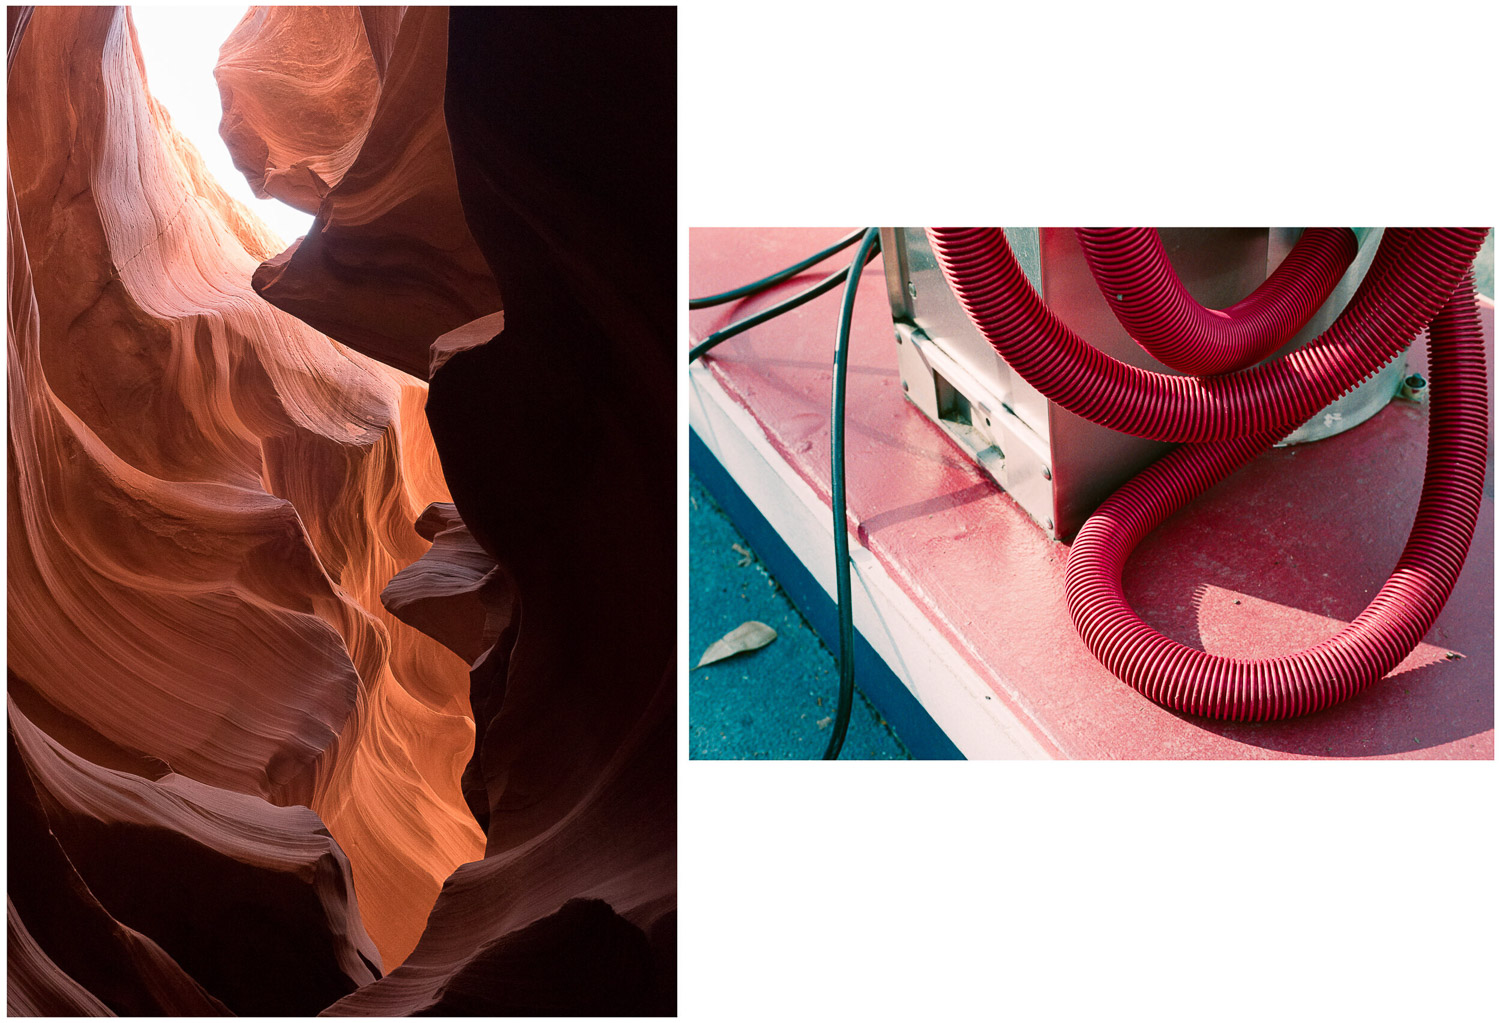 Left photograph is the Antelope Slot Canyon. Right photograph is a red hose at a car wash.